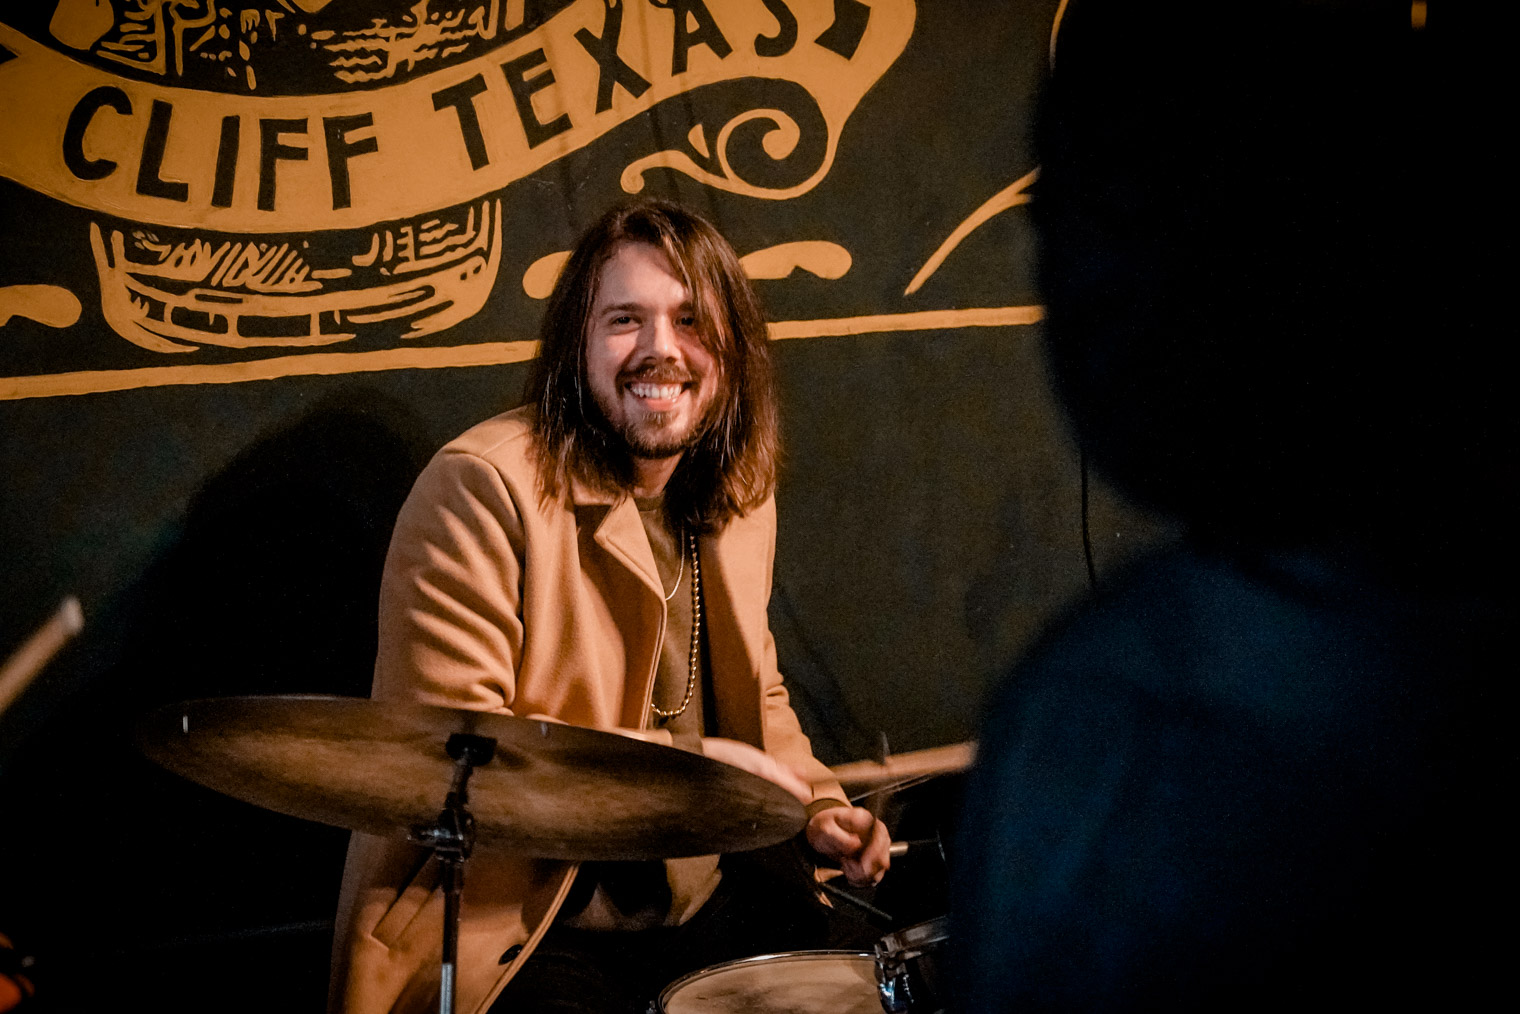 A musician playing drums and smiling